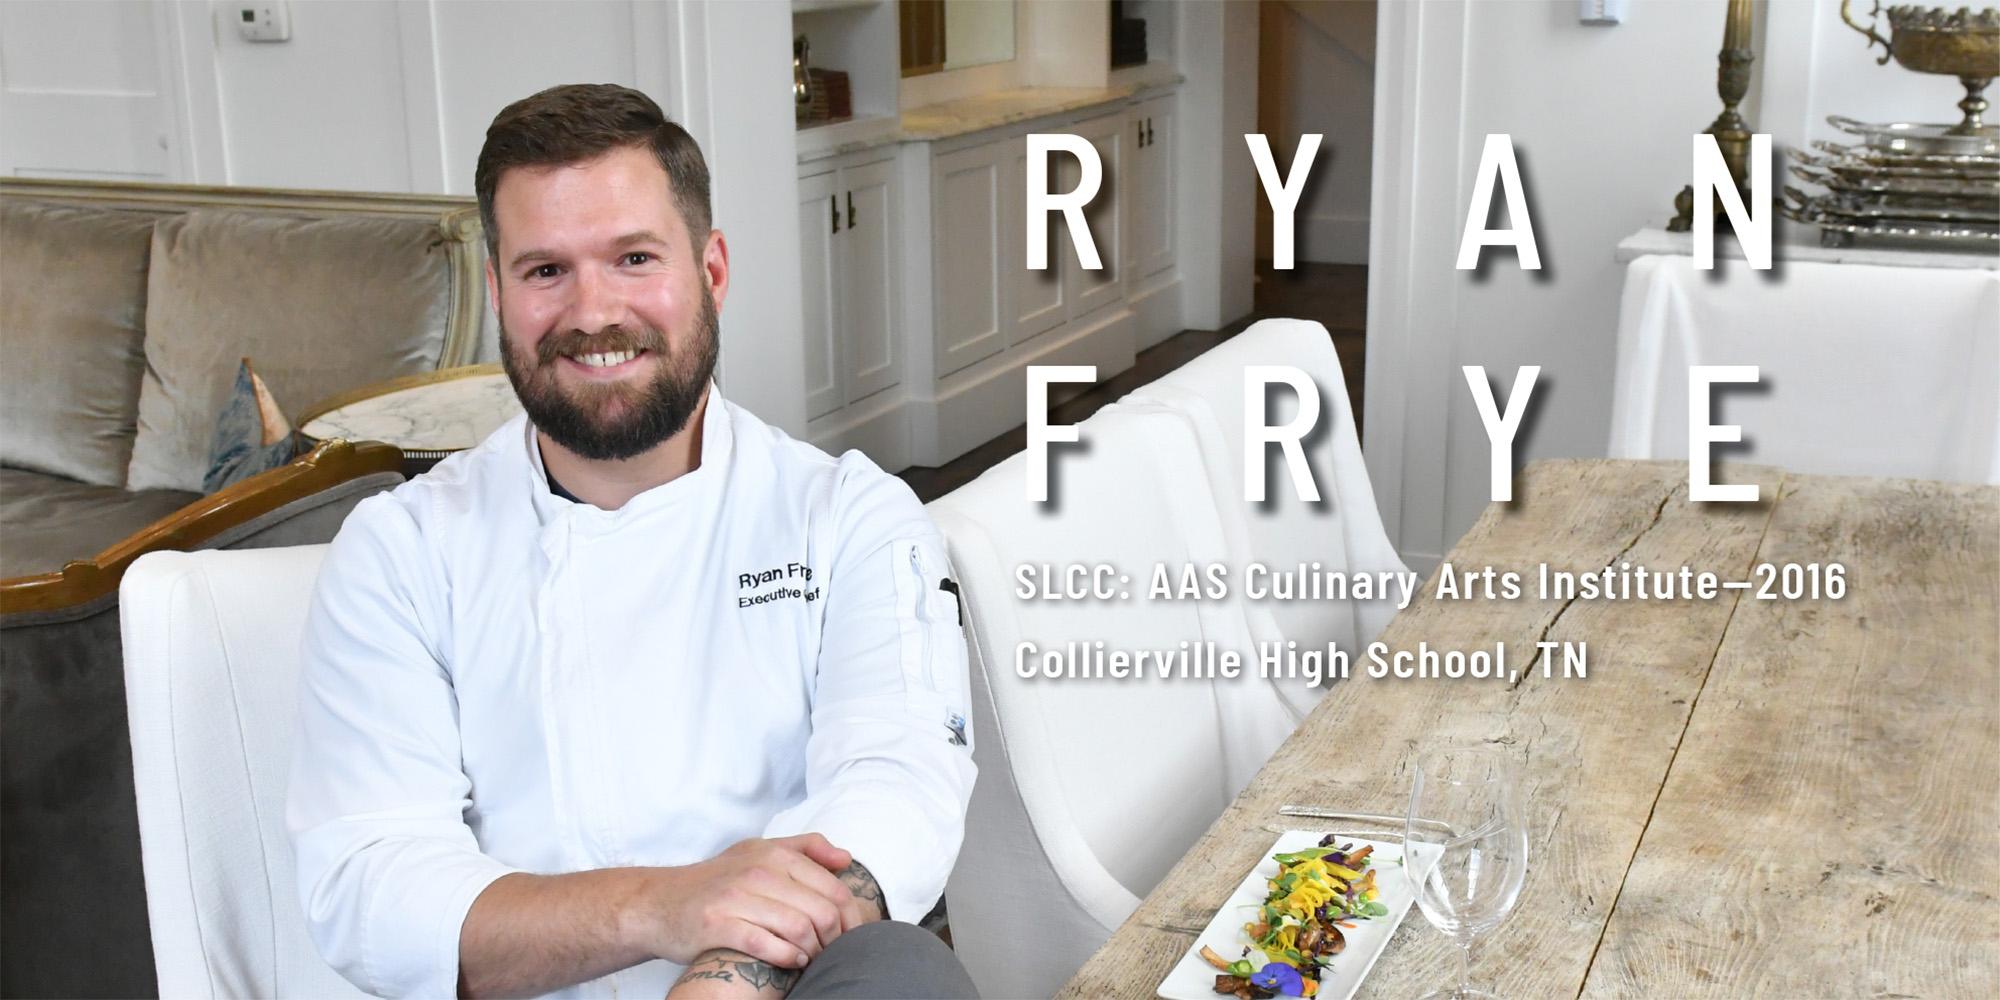 Ryan Frye, SLCC AAS Culinary Arts Institute in 2016, From Collierville High School, Tennessee